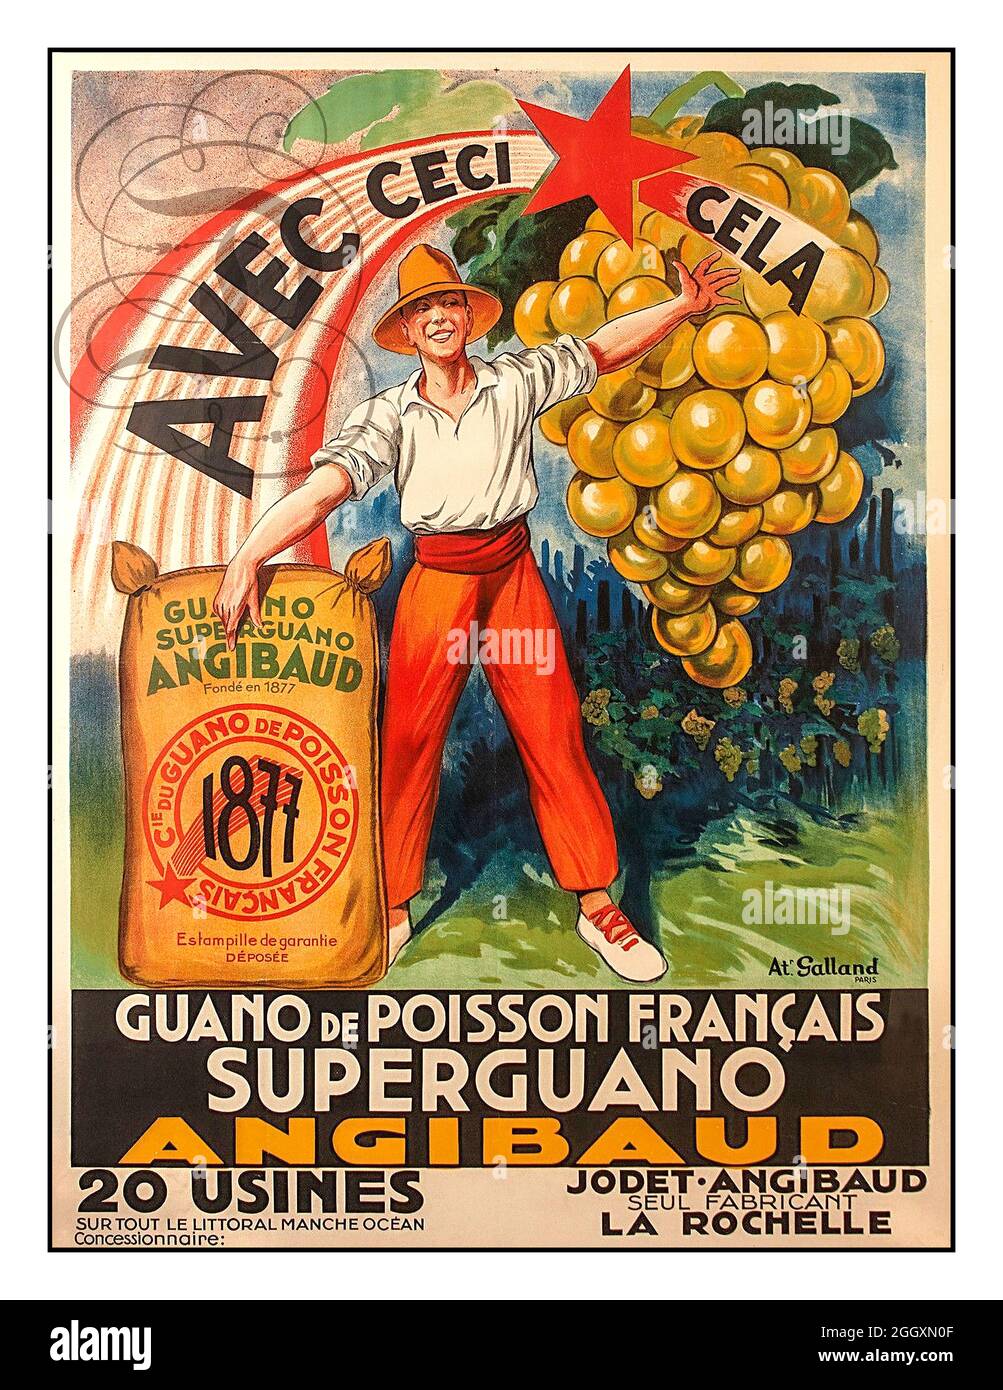 FISH FERTILISER Vintage 1920s French Agriculture Poster for GUANO Fertiliser made from French Fish 'ANGIBAUD' which helps provide wonderful grapes in vineyard.. La Rochelle France GUANO de POISSON FRANCAIS Superguano Angibaud  AVEC CECI -CELA Stock Photo